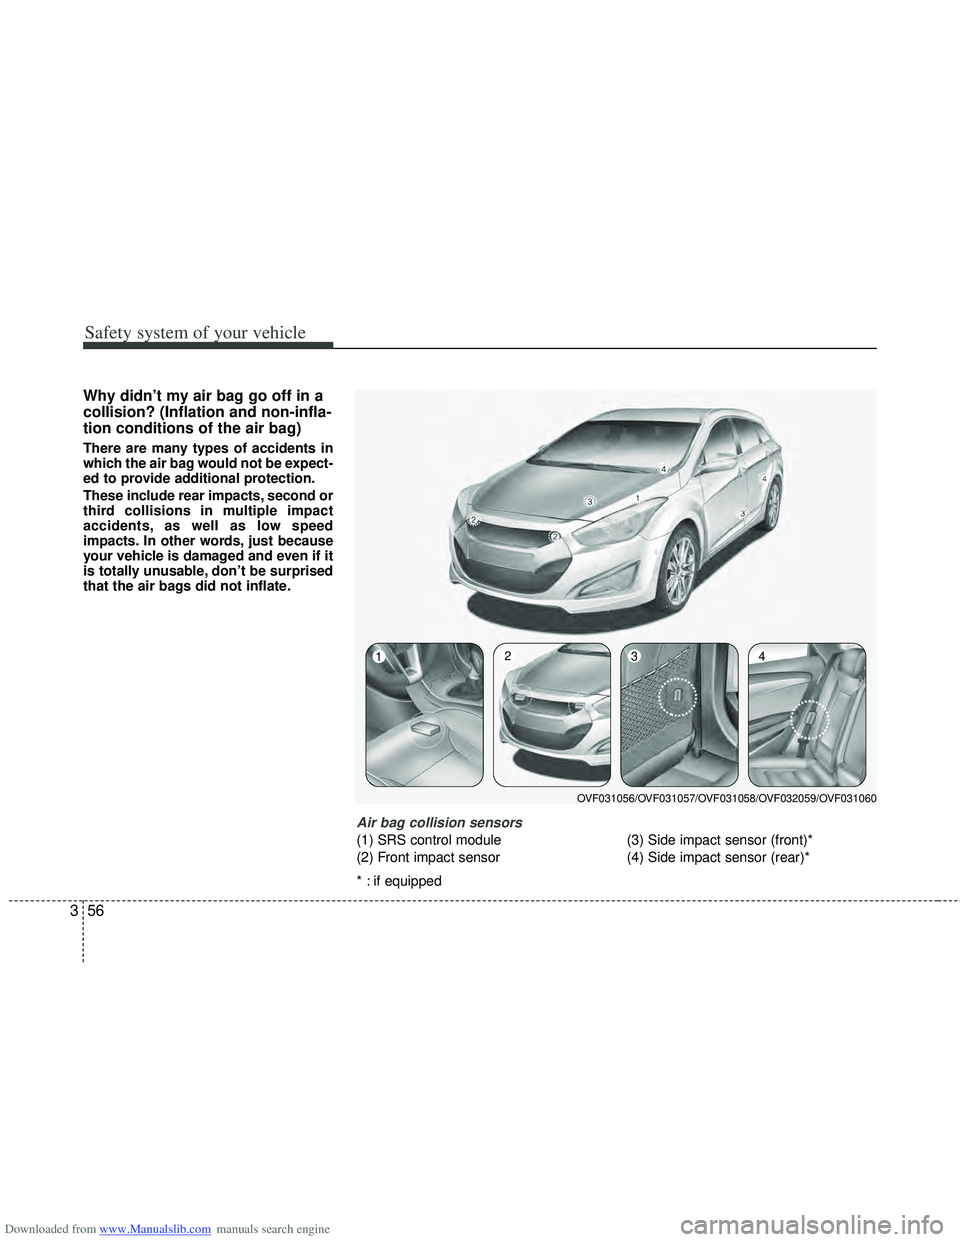 HYUNDAI I40 2012  Owners Manual Downloaded from www.Manualslib.com manuals search engine Safety system of your vehicle
56
3
Why didn’t my air bag go off in a
collision? (Inflation and non-infla-
tion conditions of the air bag)
The